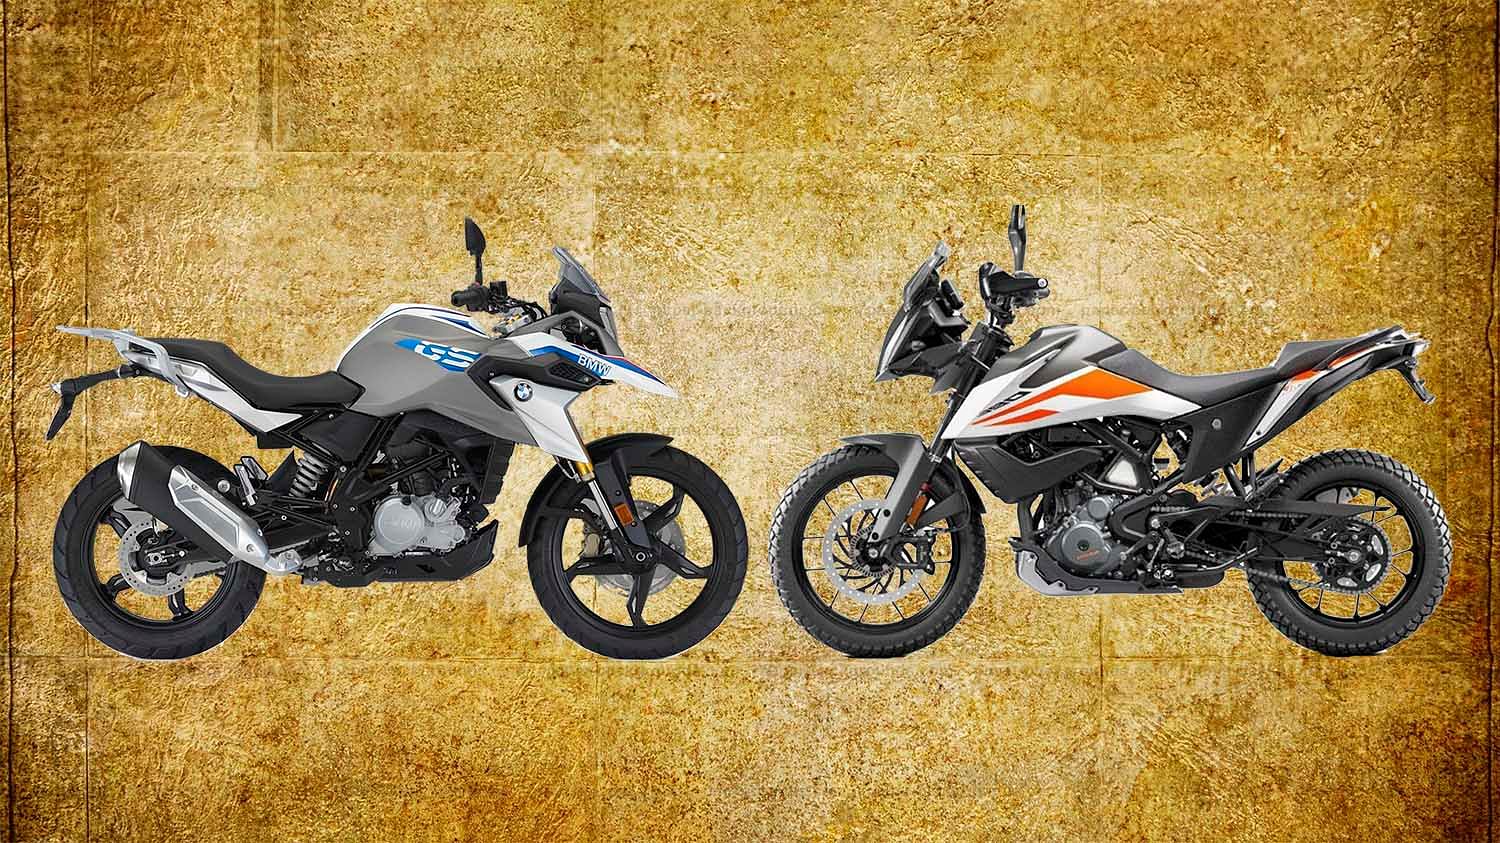 BMW G310 GS (left) faces tough competition from KTM 390 (right) Adventure in India.&nbsp;